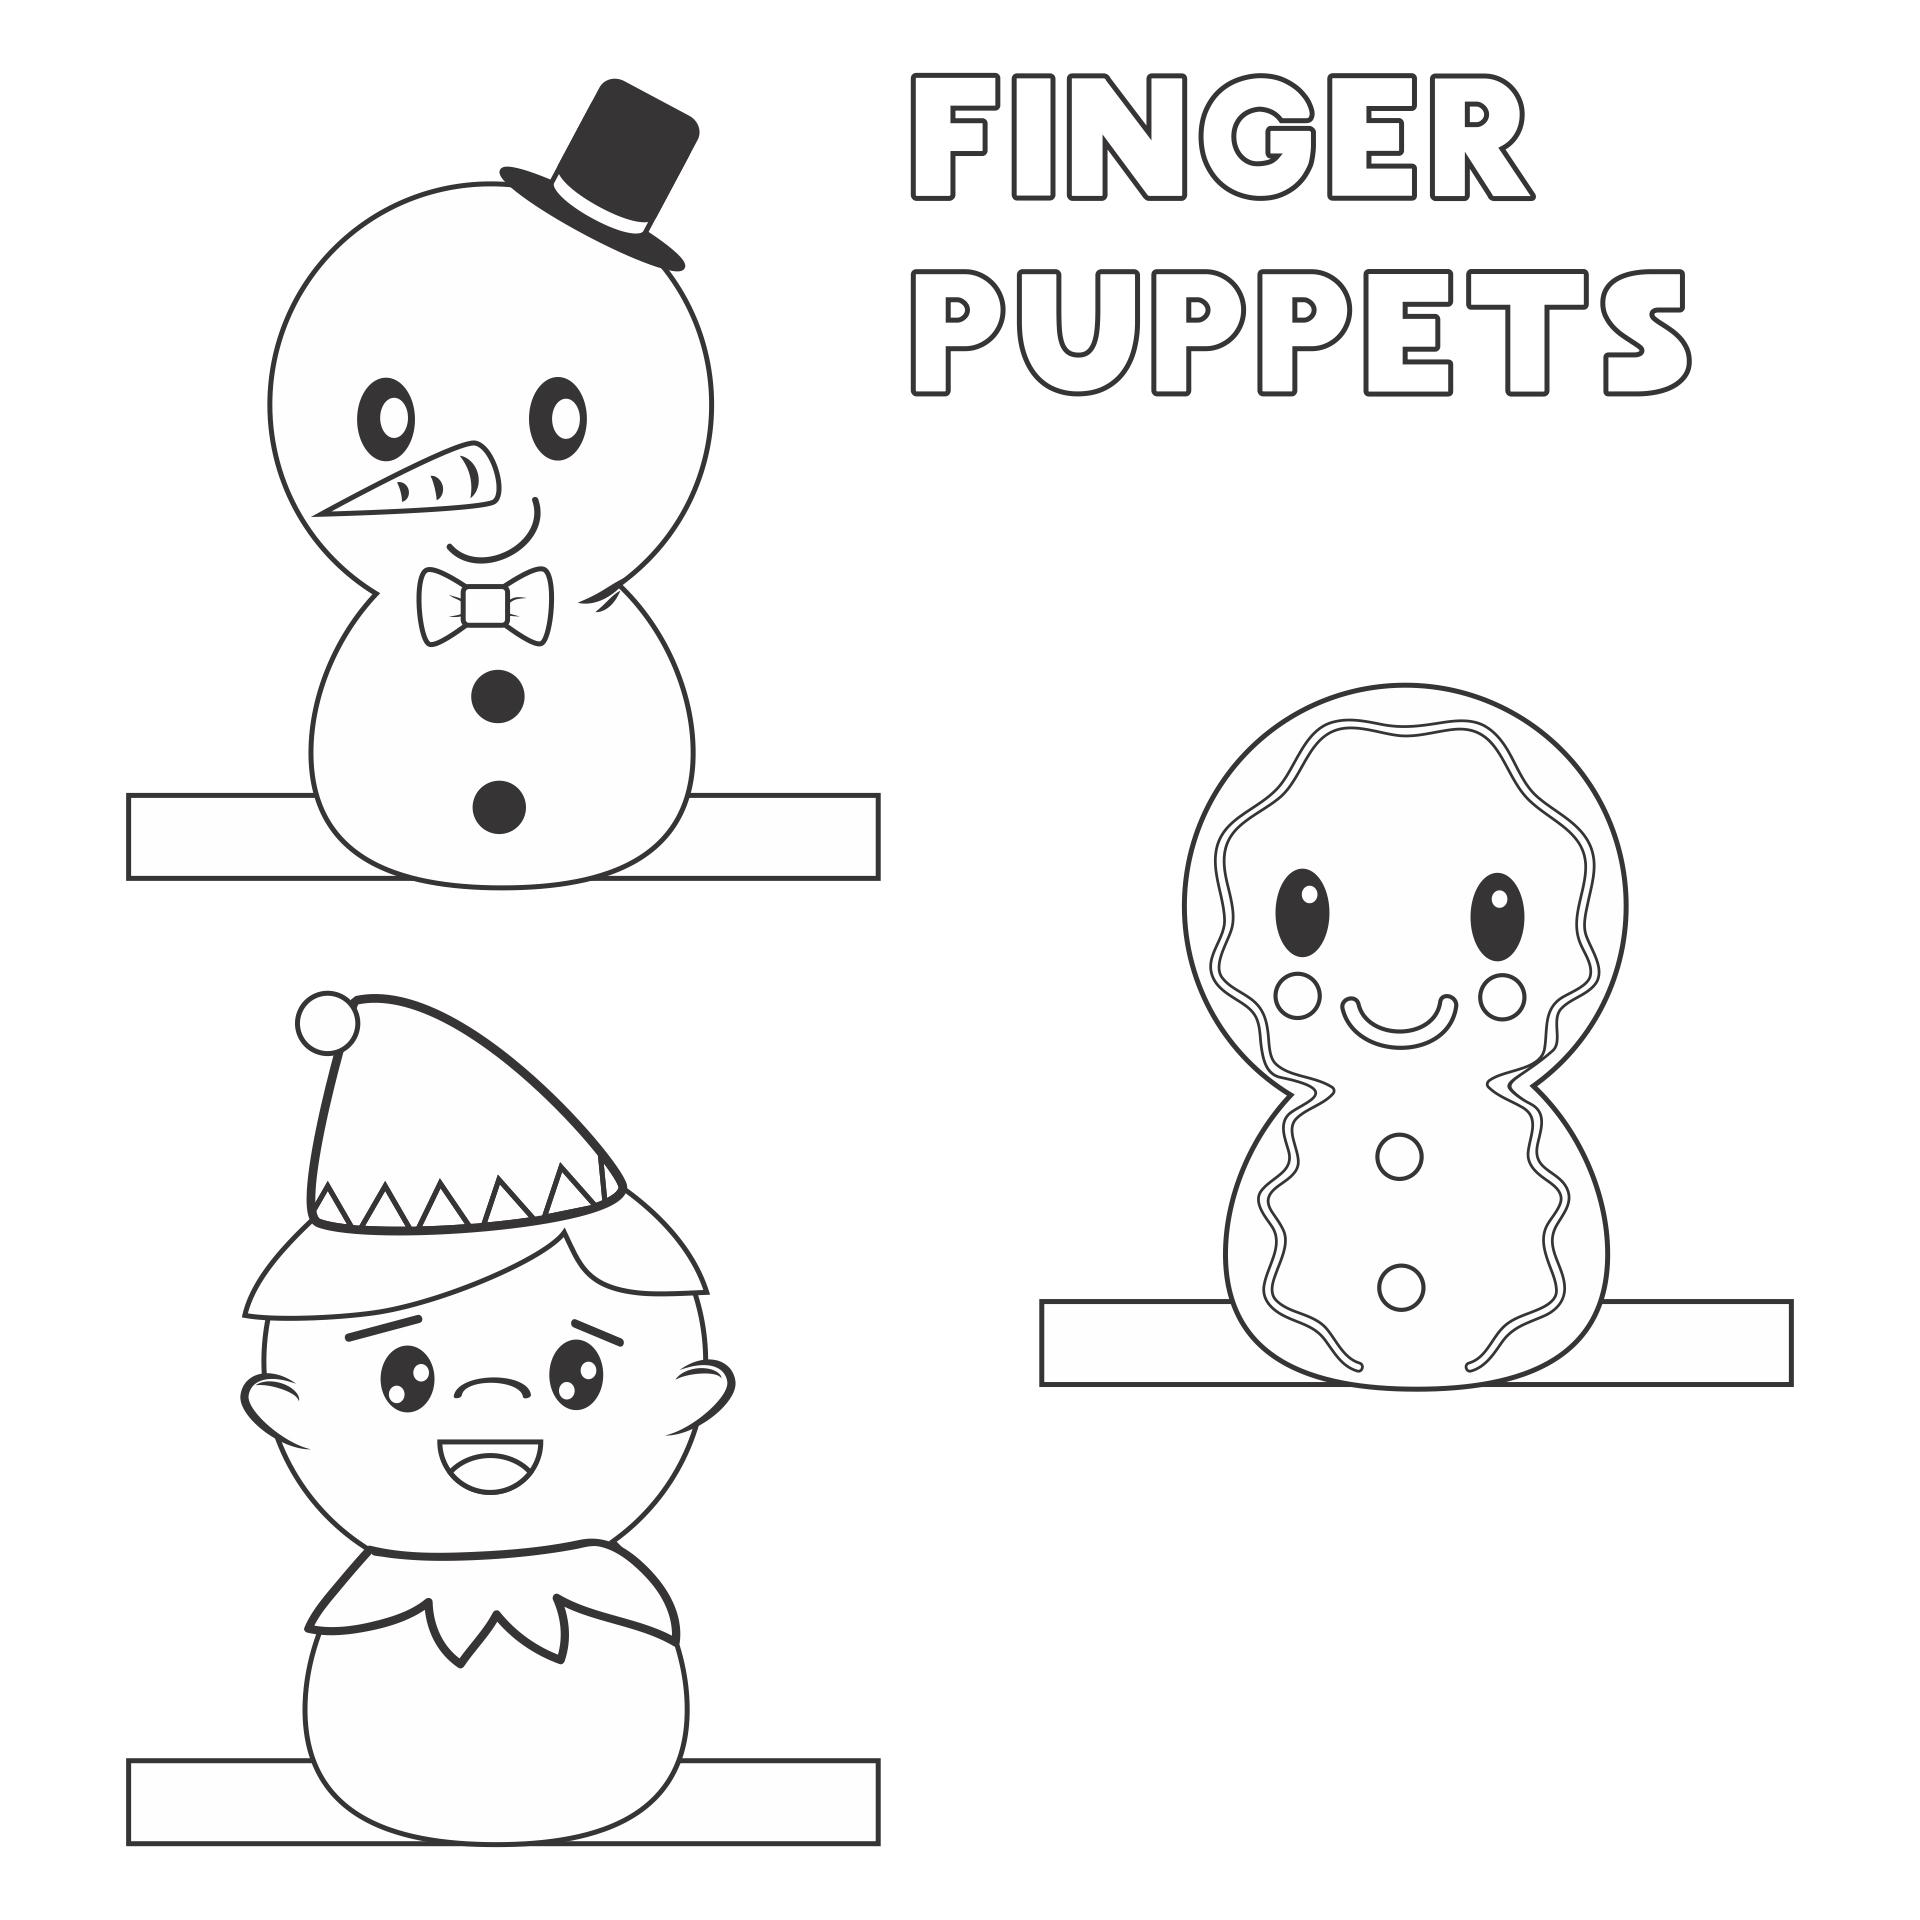 52-festive-christmas-crafts-for-kids-free-templates